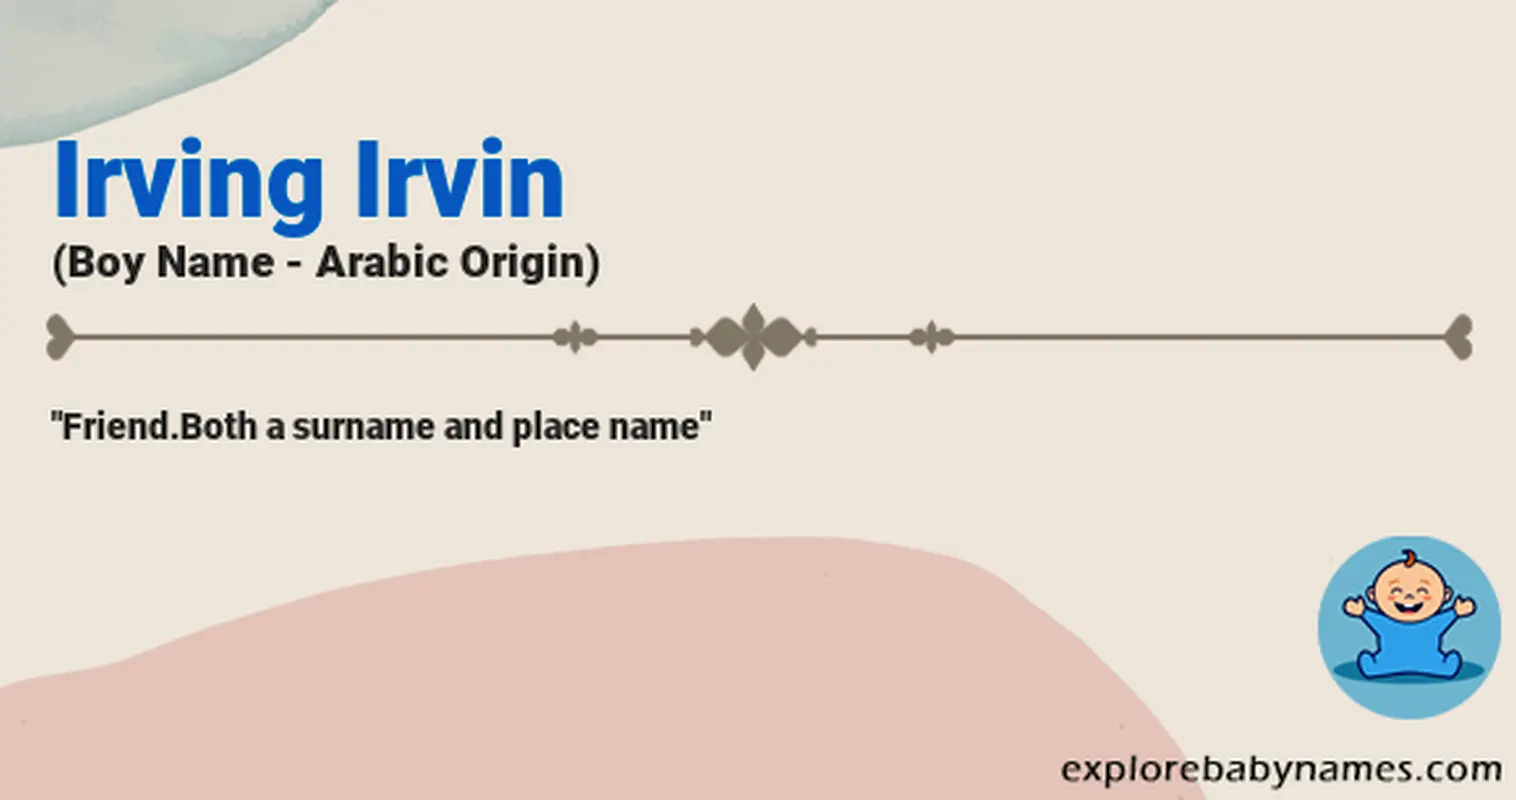 Meaning of Irving Irvin